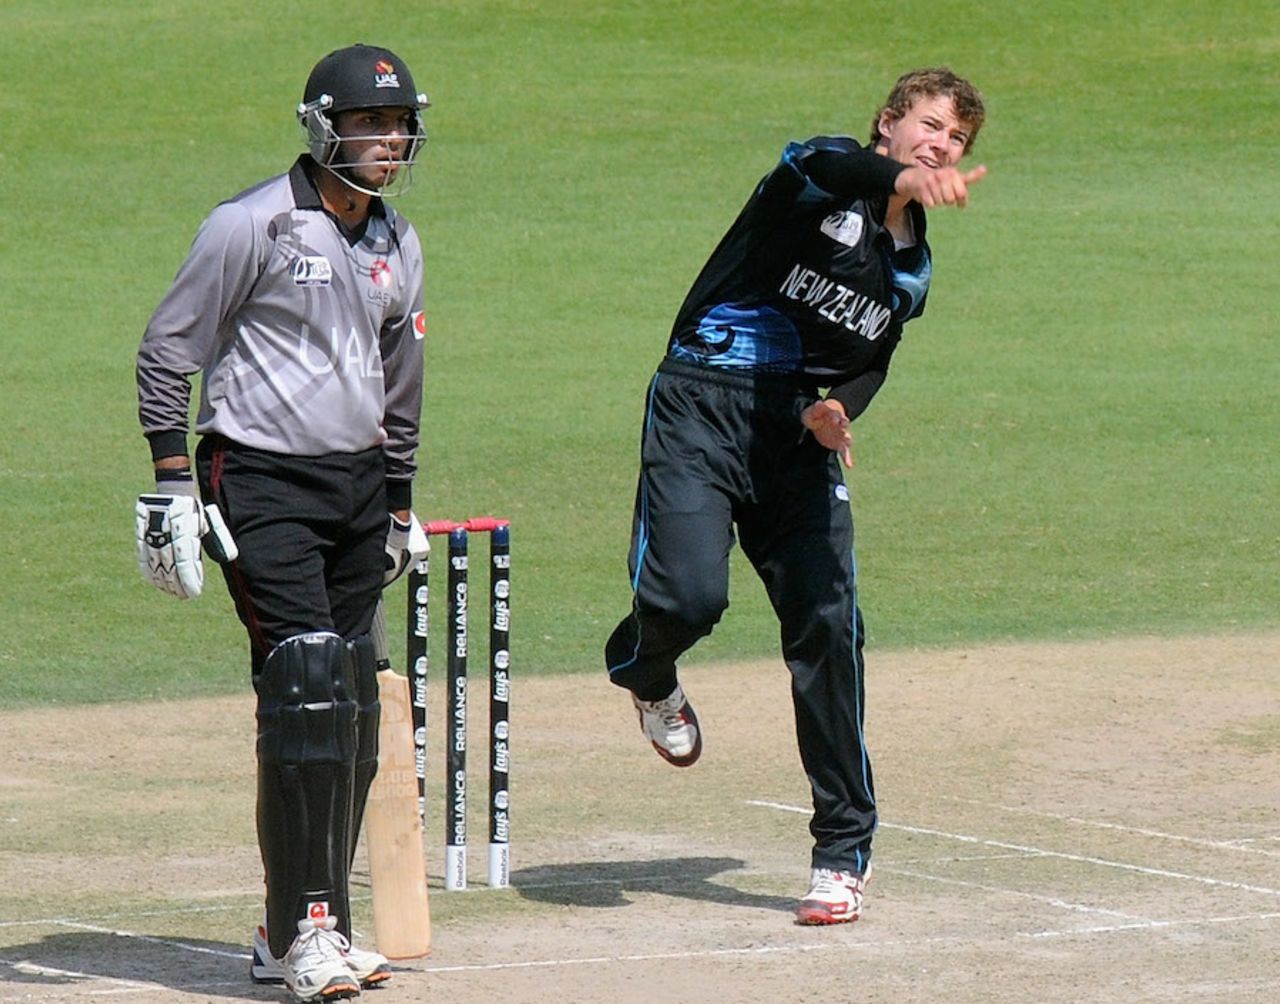 Josh Finnie picked up two wickets in his three overs, UAE v New Zealand, 2nd Plate Semi-Final, Under-19 World Cup, Abu Dhabi, February 25, 2014